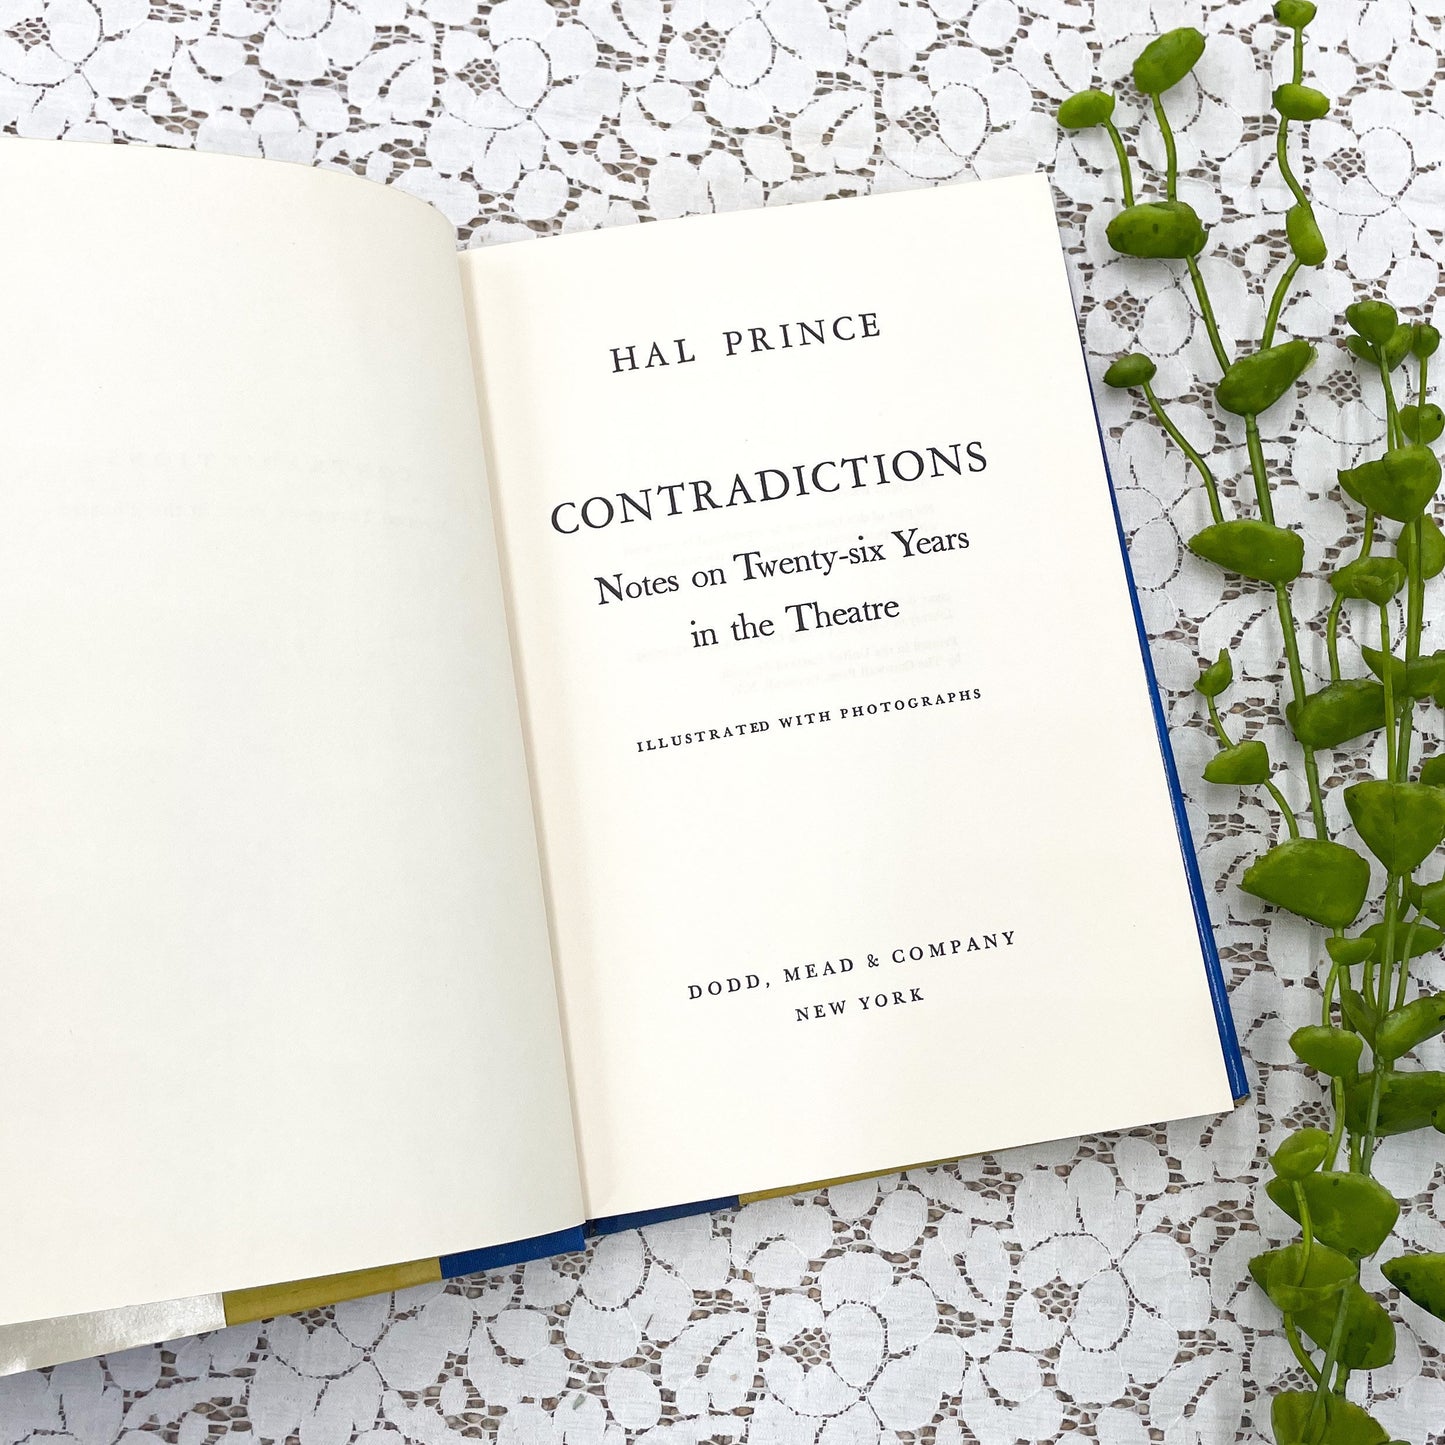 Contradictions: Notes on Twenty-Six Years in the Theatre by Hal Prince